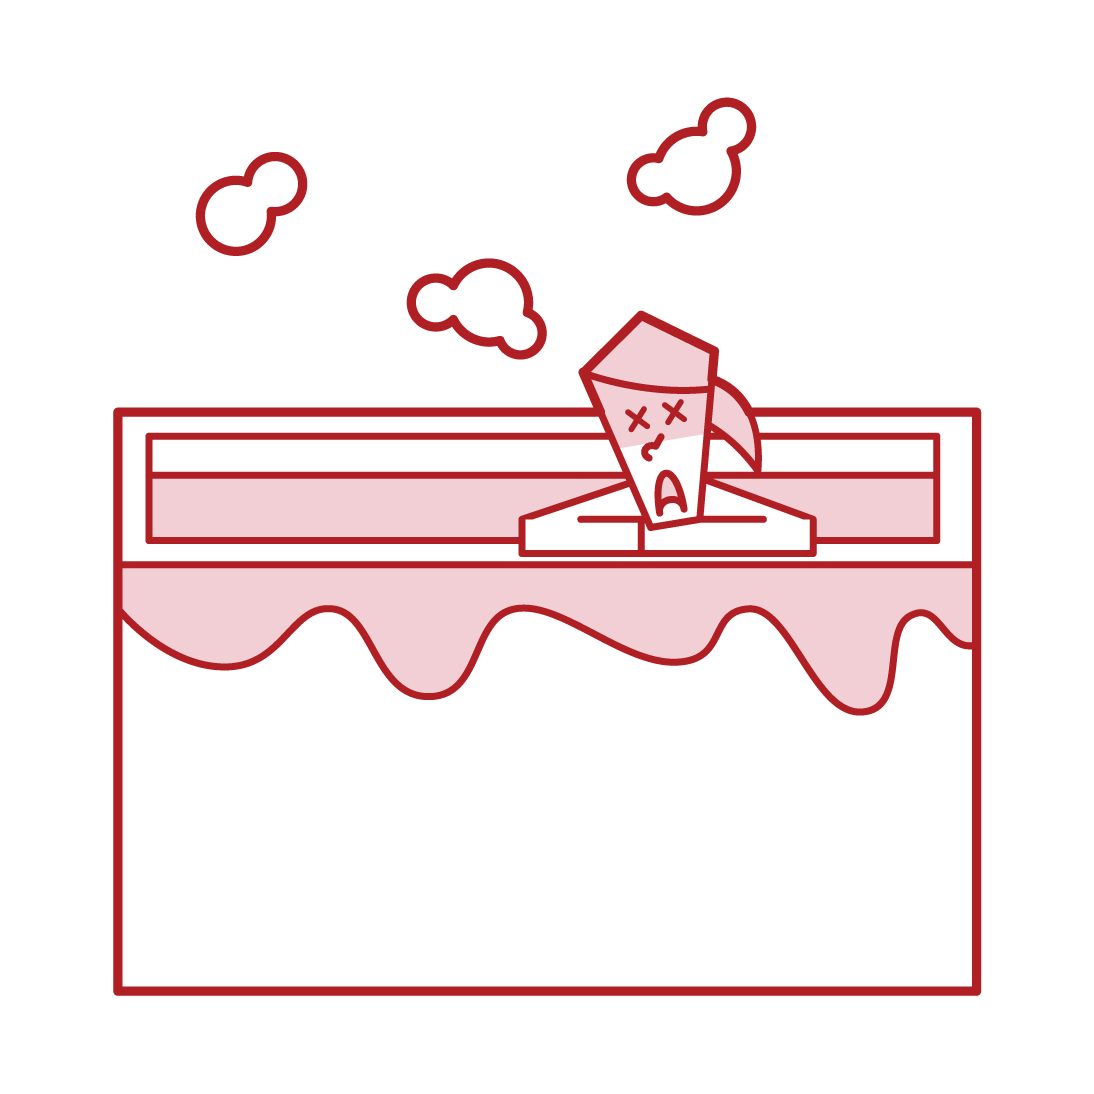 Illustration of a woman who can blur in the bath